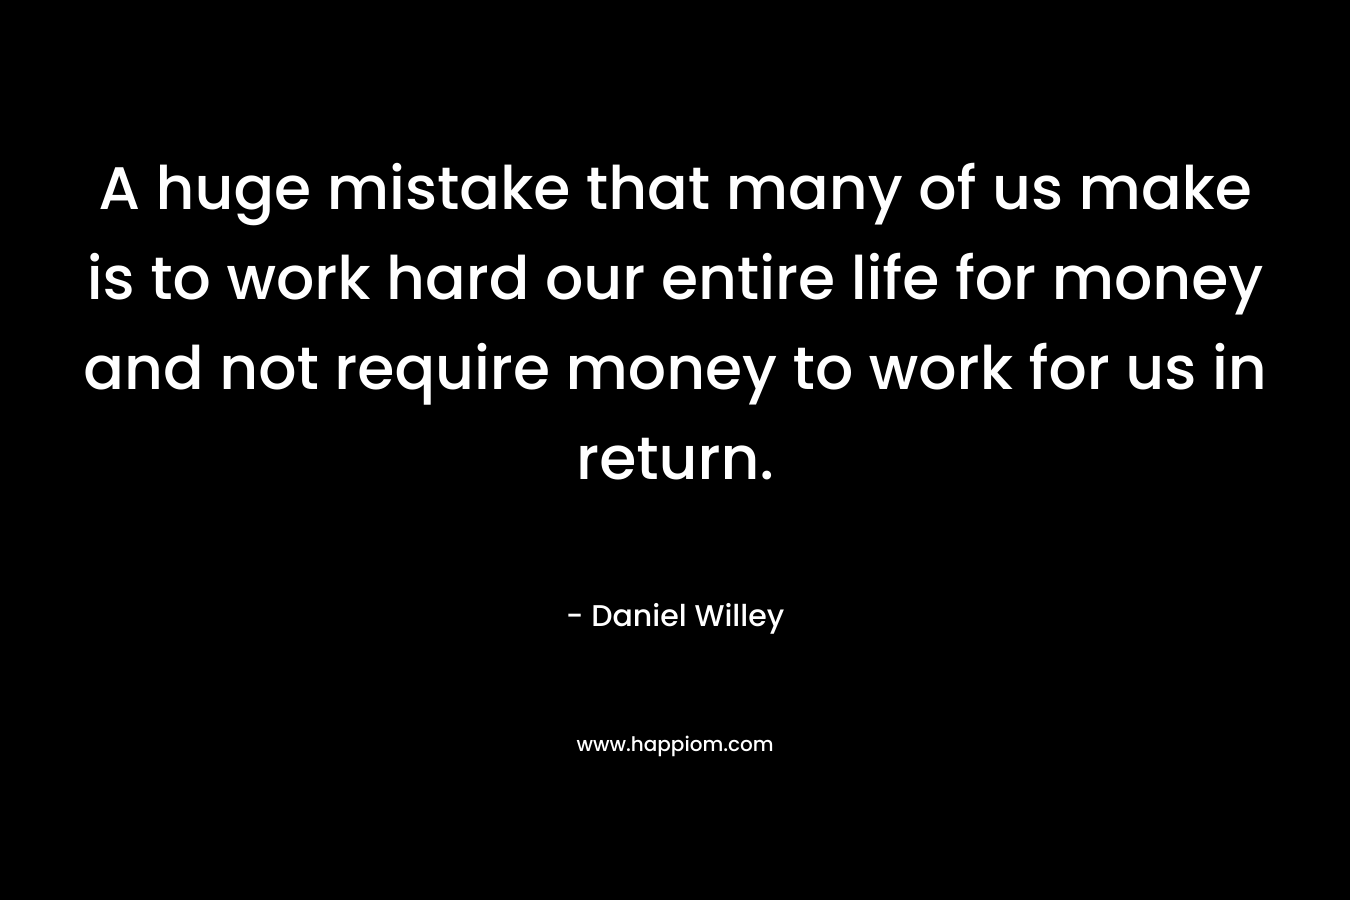 A huge mistake that many of us make is to work hard our entire life for money and not require money to work for us in return. – Daniel Willey